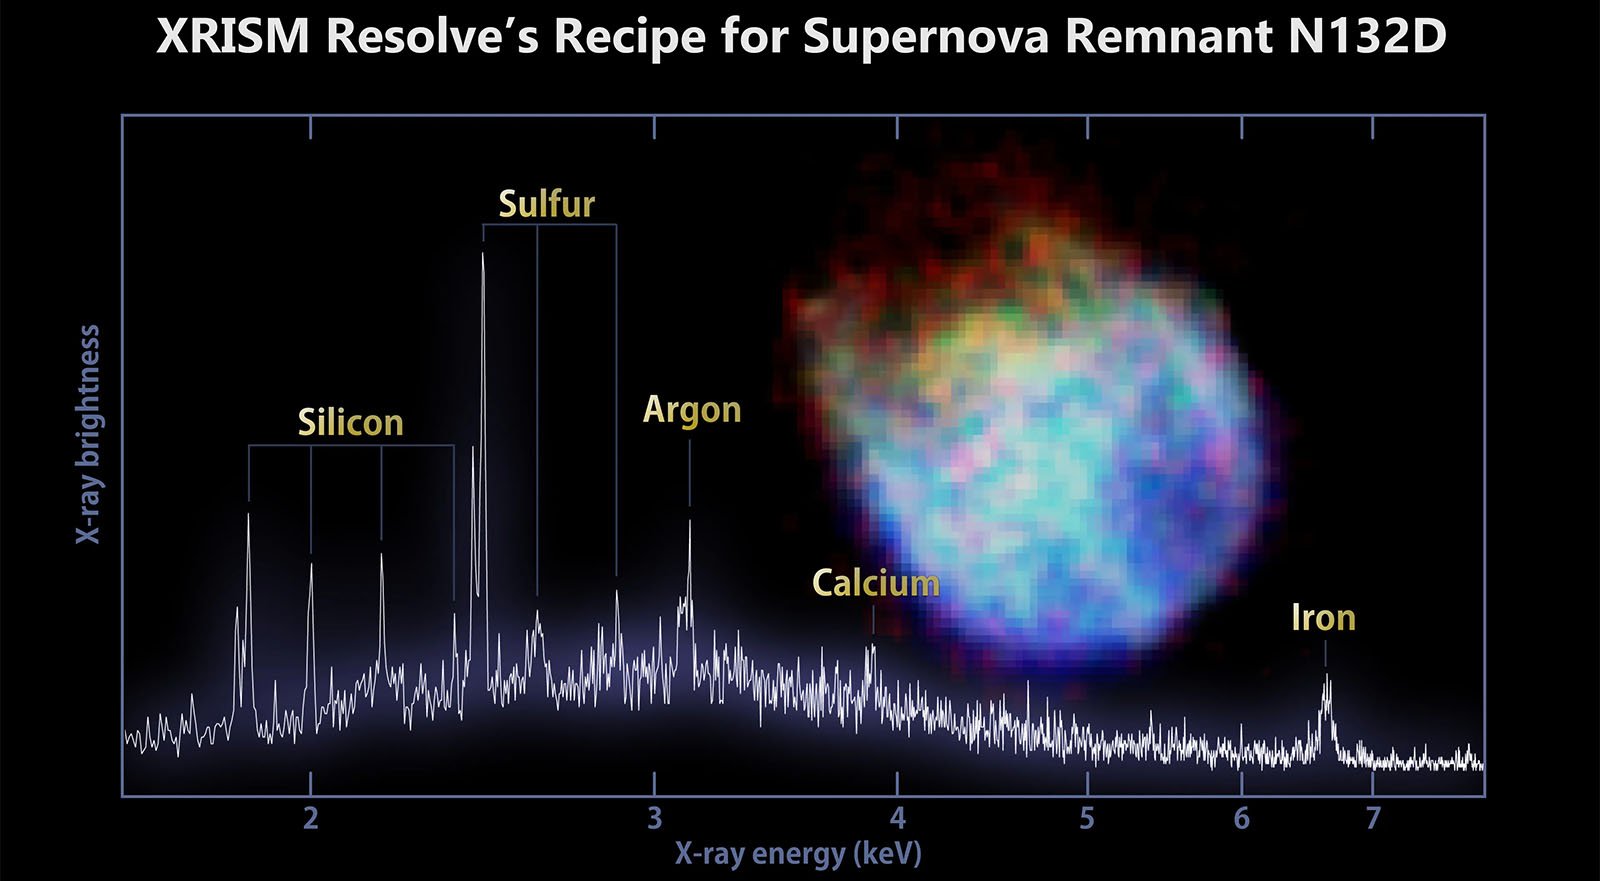 Graph showing xrism resolve's spectral analysis of supernova remnant n132d, with labels for elements like sulfur, silicon, argon, calcium, and iron, alongside an x-ray image of the remnant in various colors.